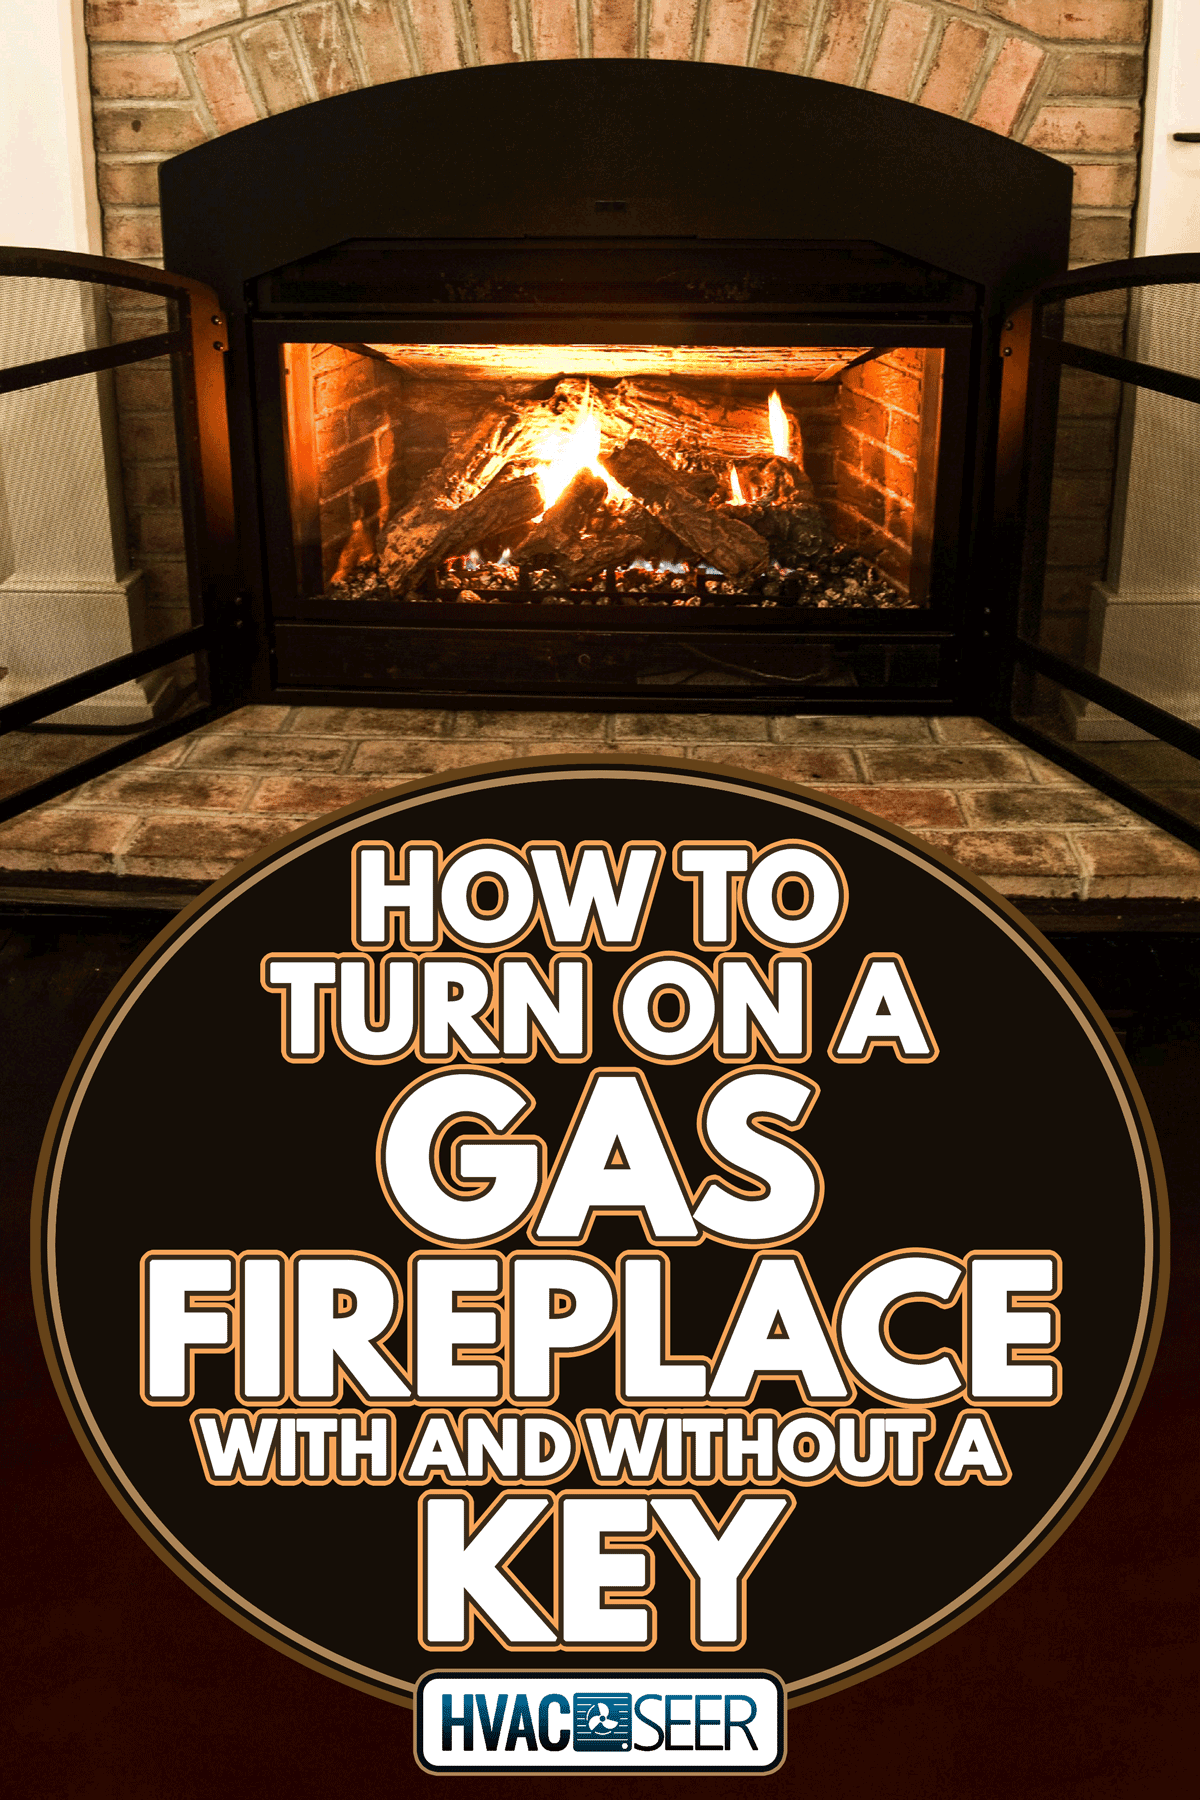 Gas fireplace provides warmth on a home during cold winter, How To Turn On A Gas Fireplace With And Without A Key